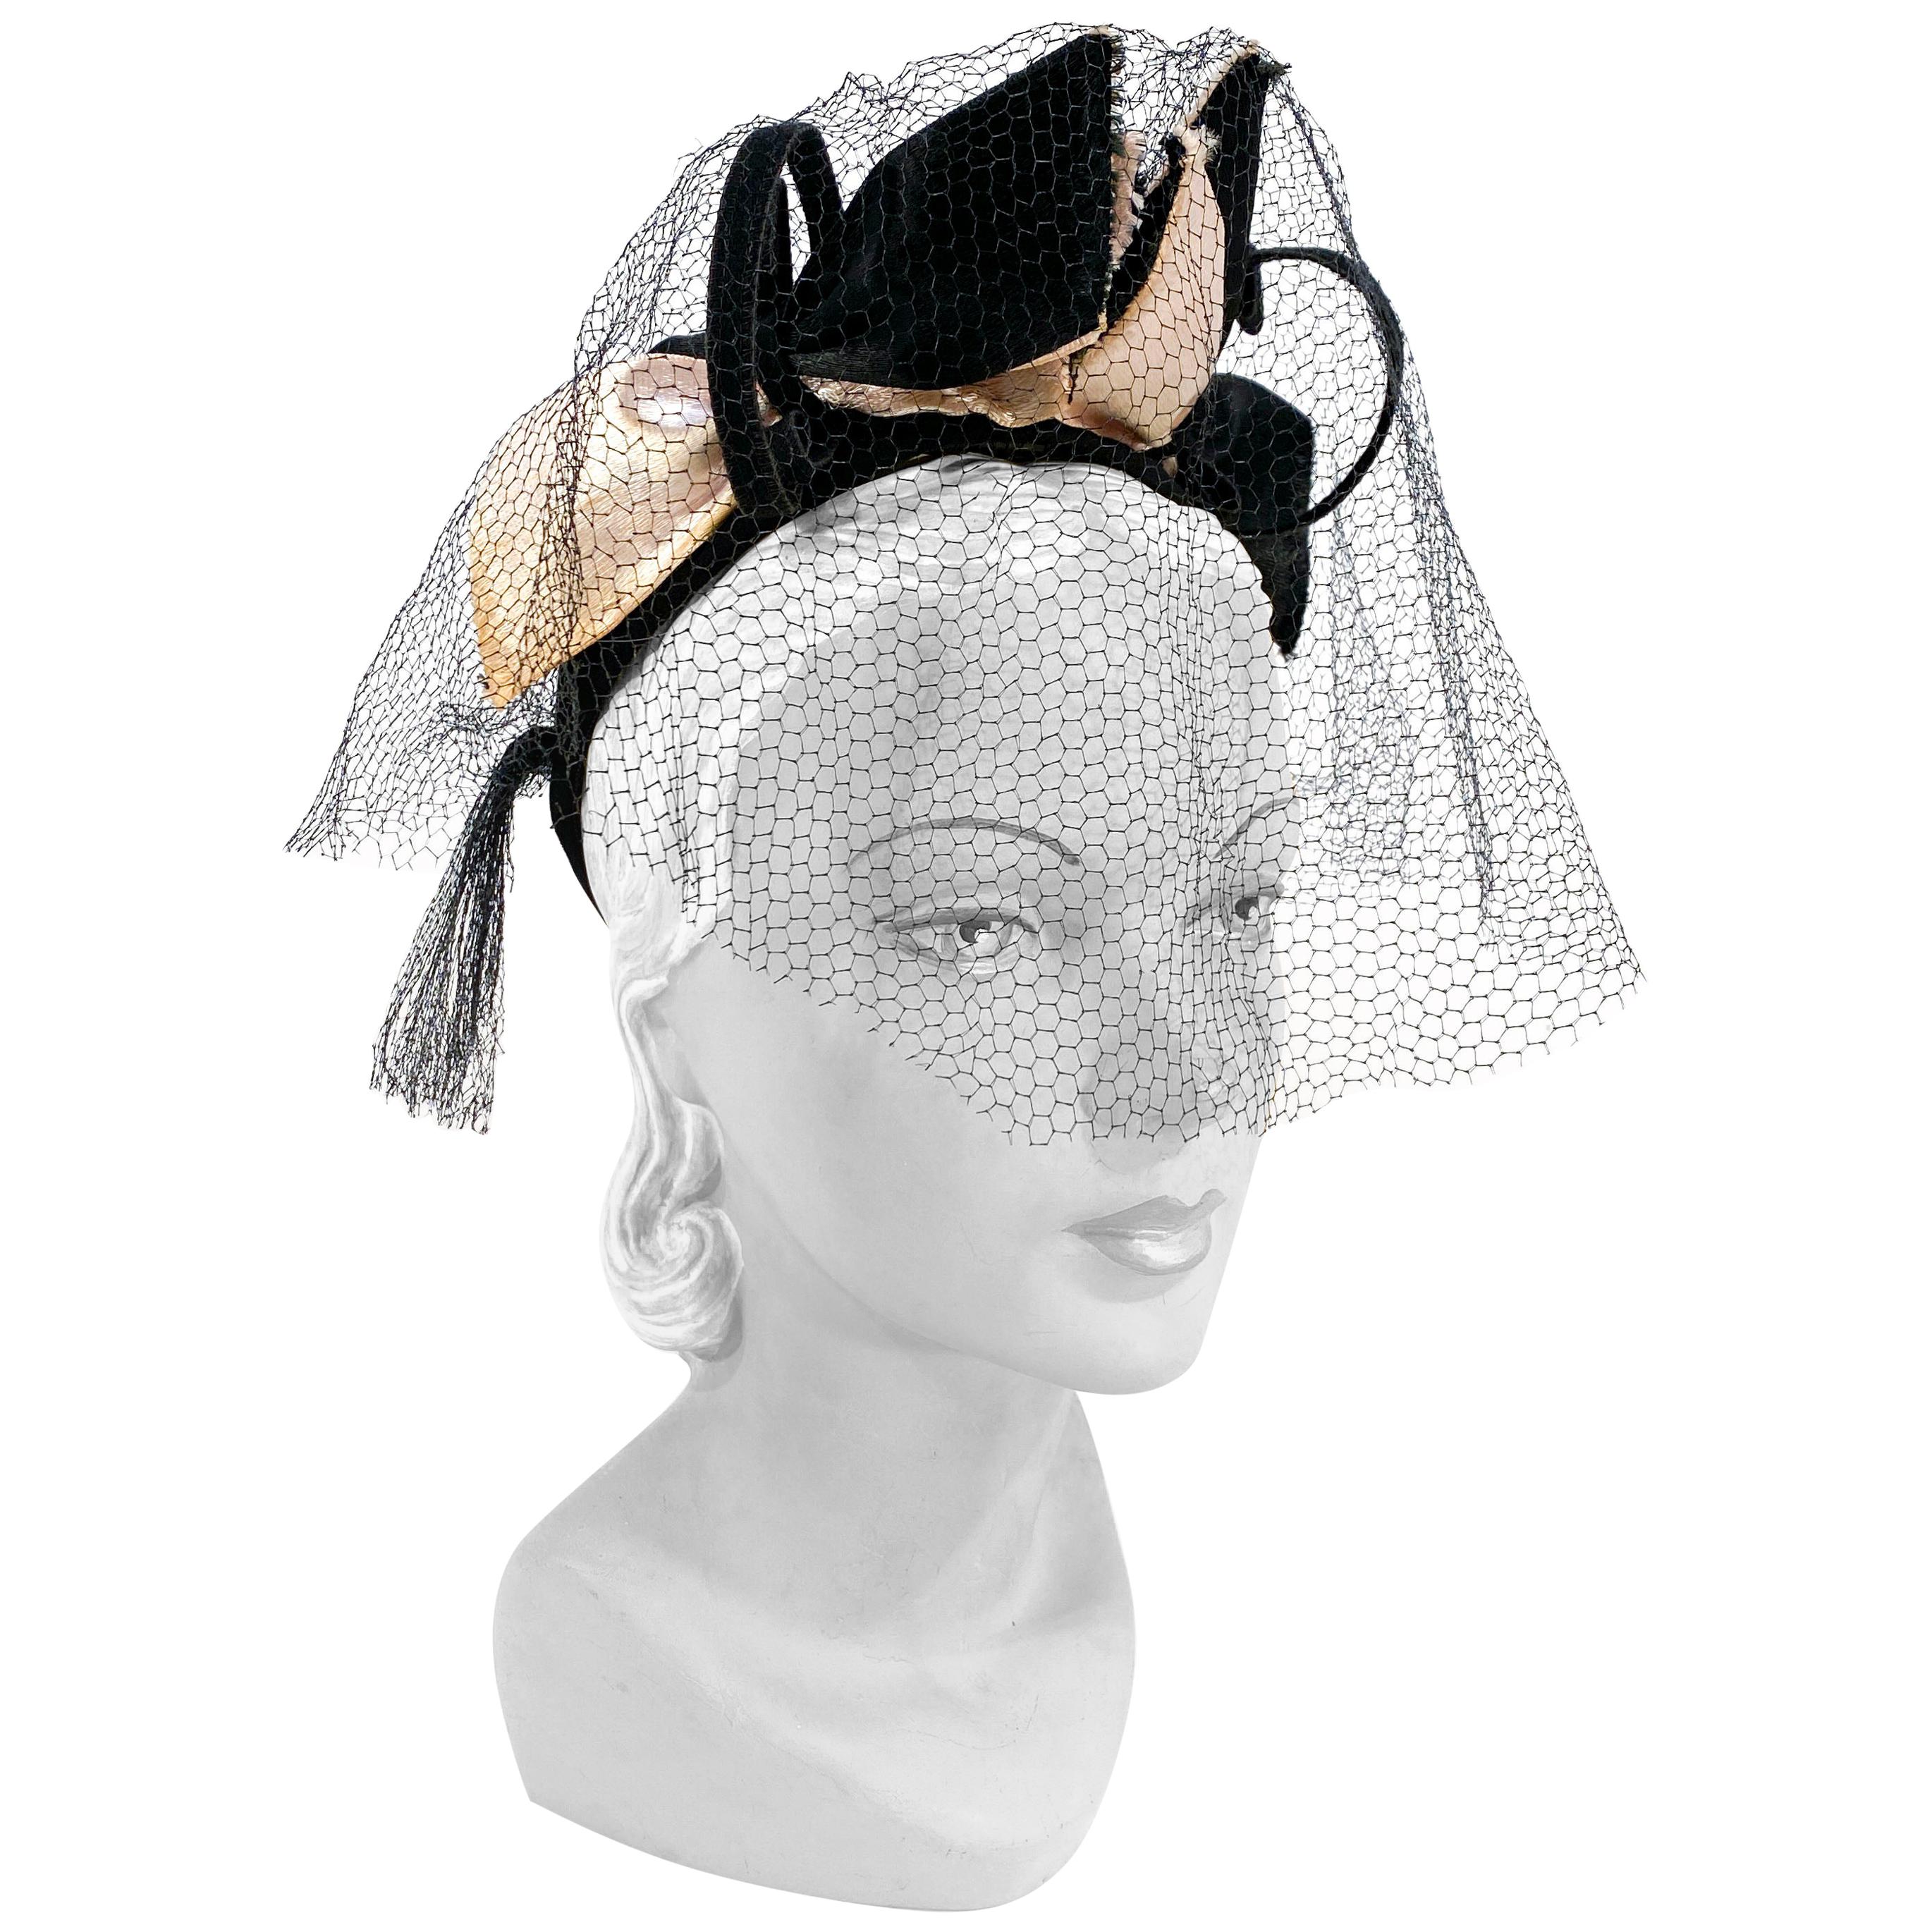 1930s Black Sculpted Cocktail Hat with Satin Bows and Net